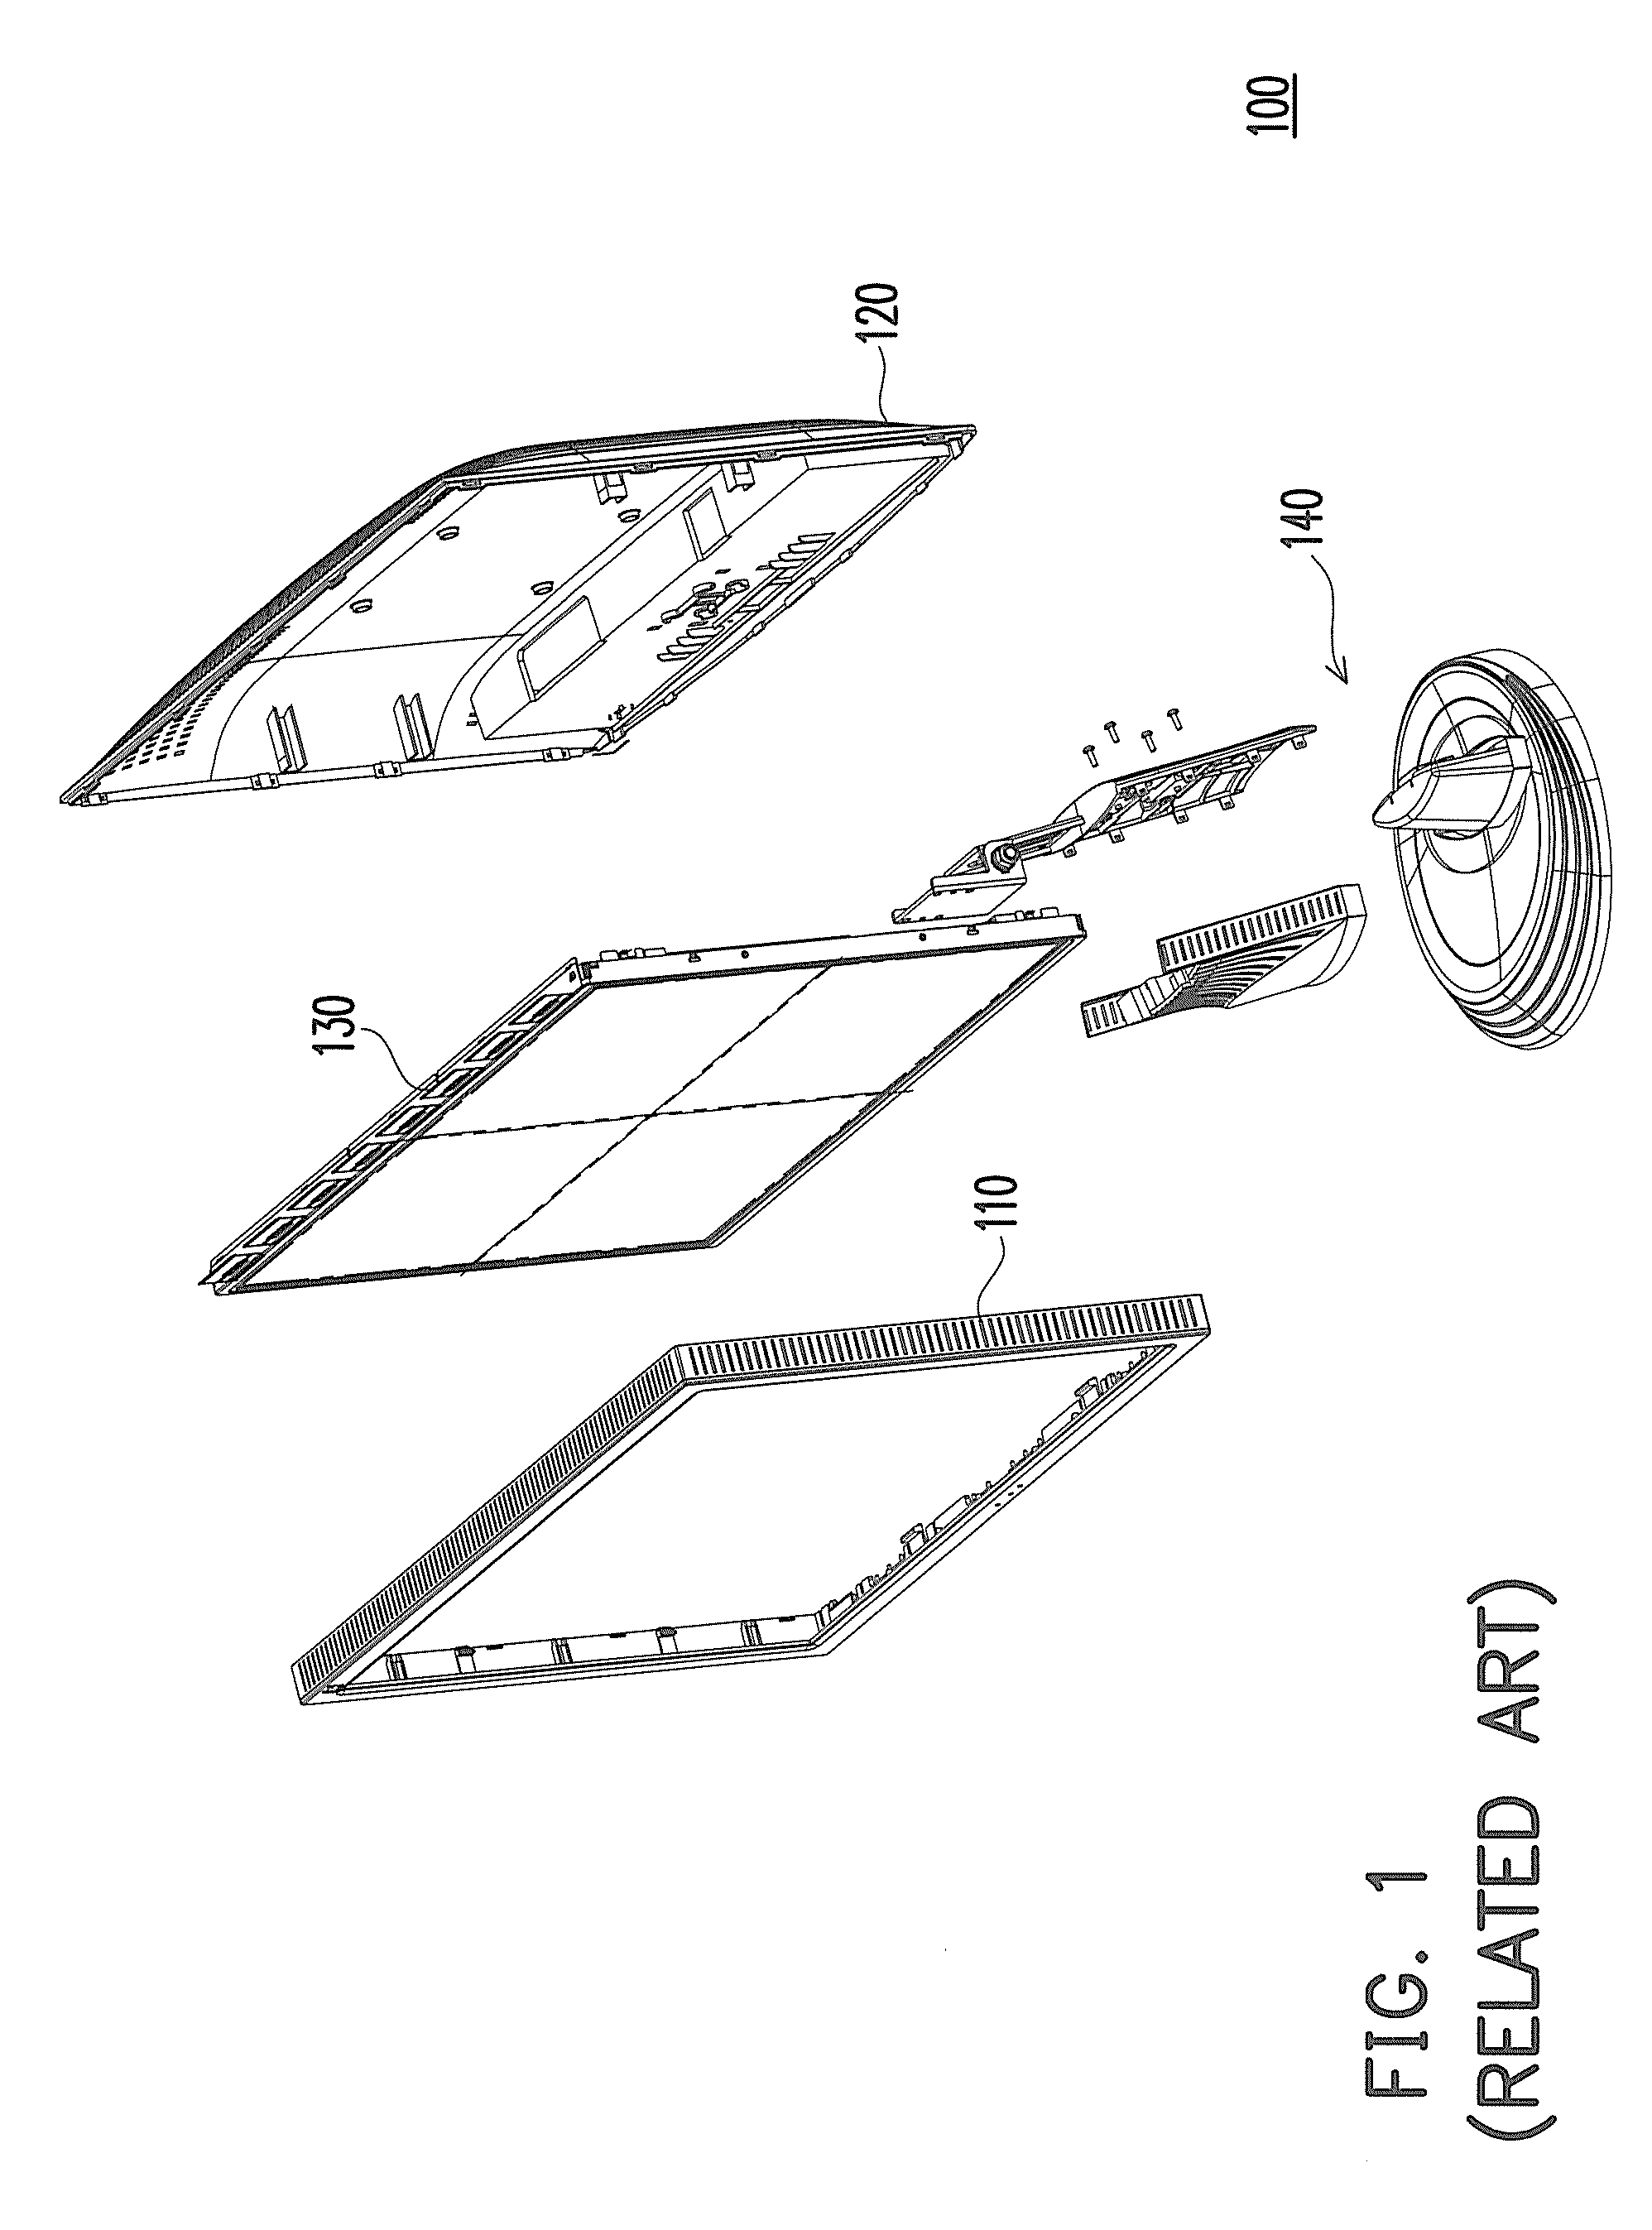 Display apparatus and assembling method thereof